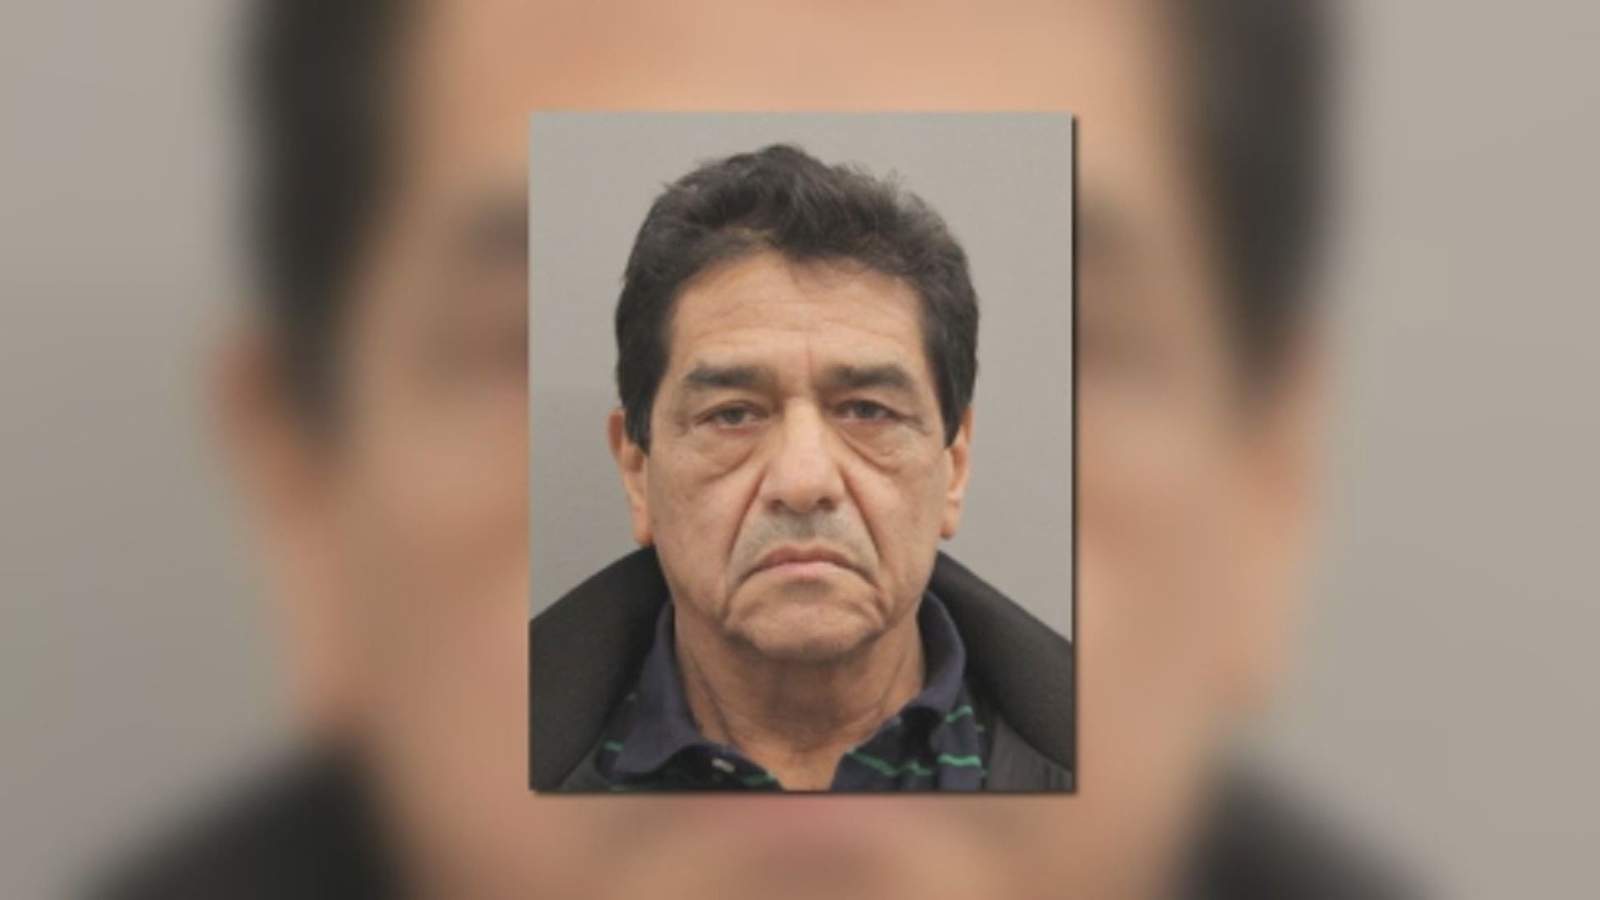 Ex-HISD teacher accused of molesting child arrested again after second person comes forward